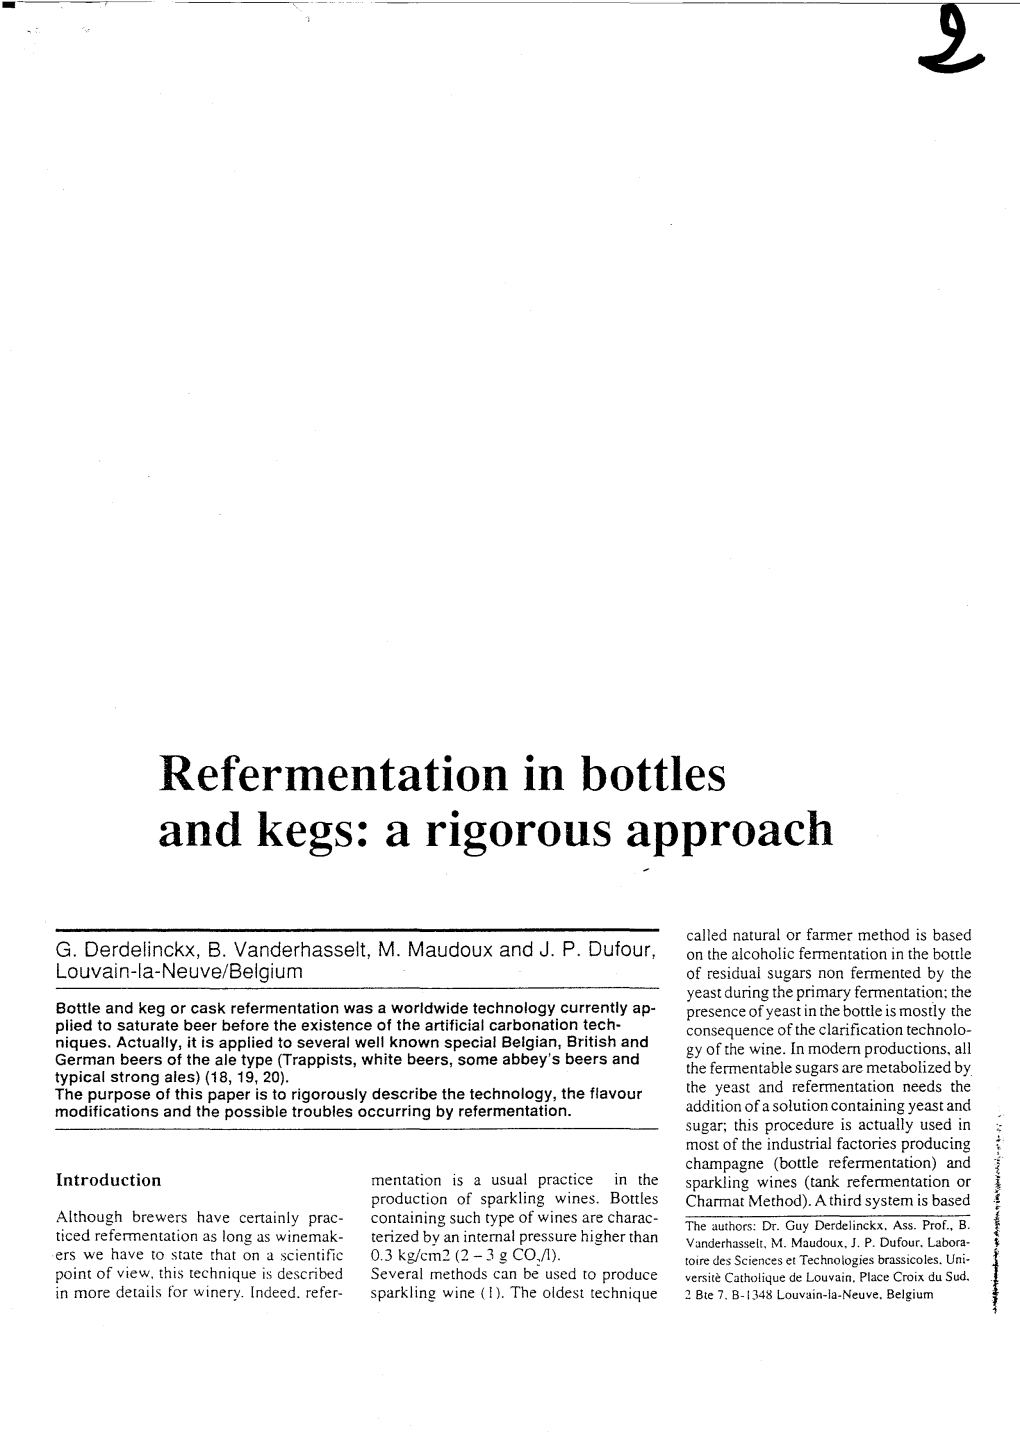 Referinentation in Bottles and Kegs: a Rigorous Approach